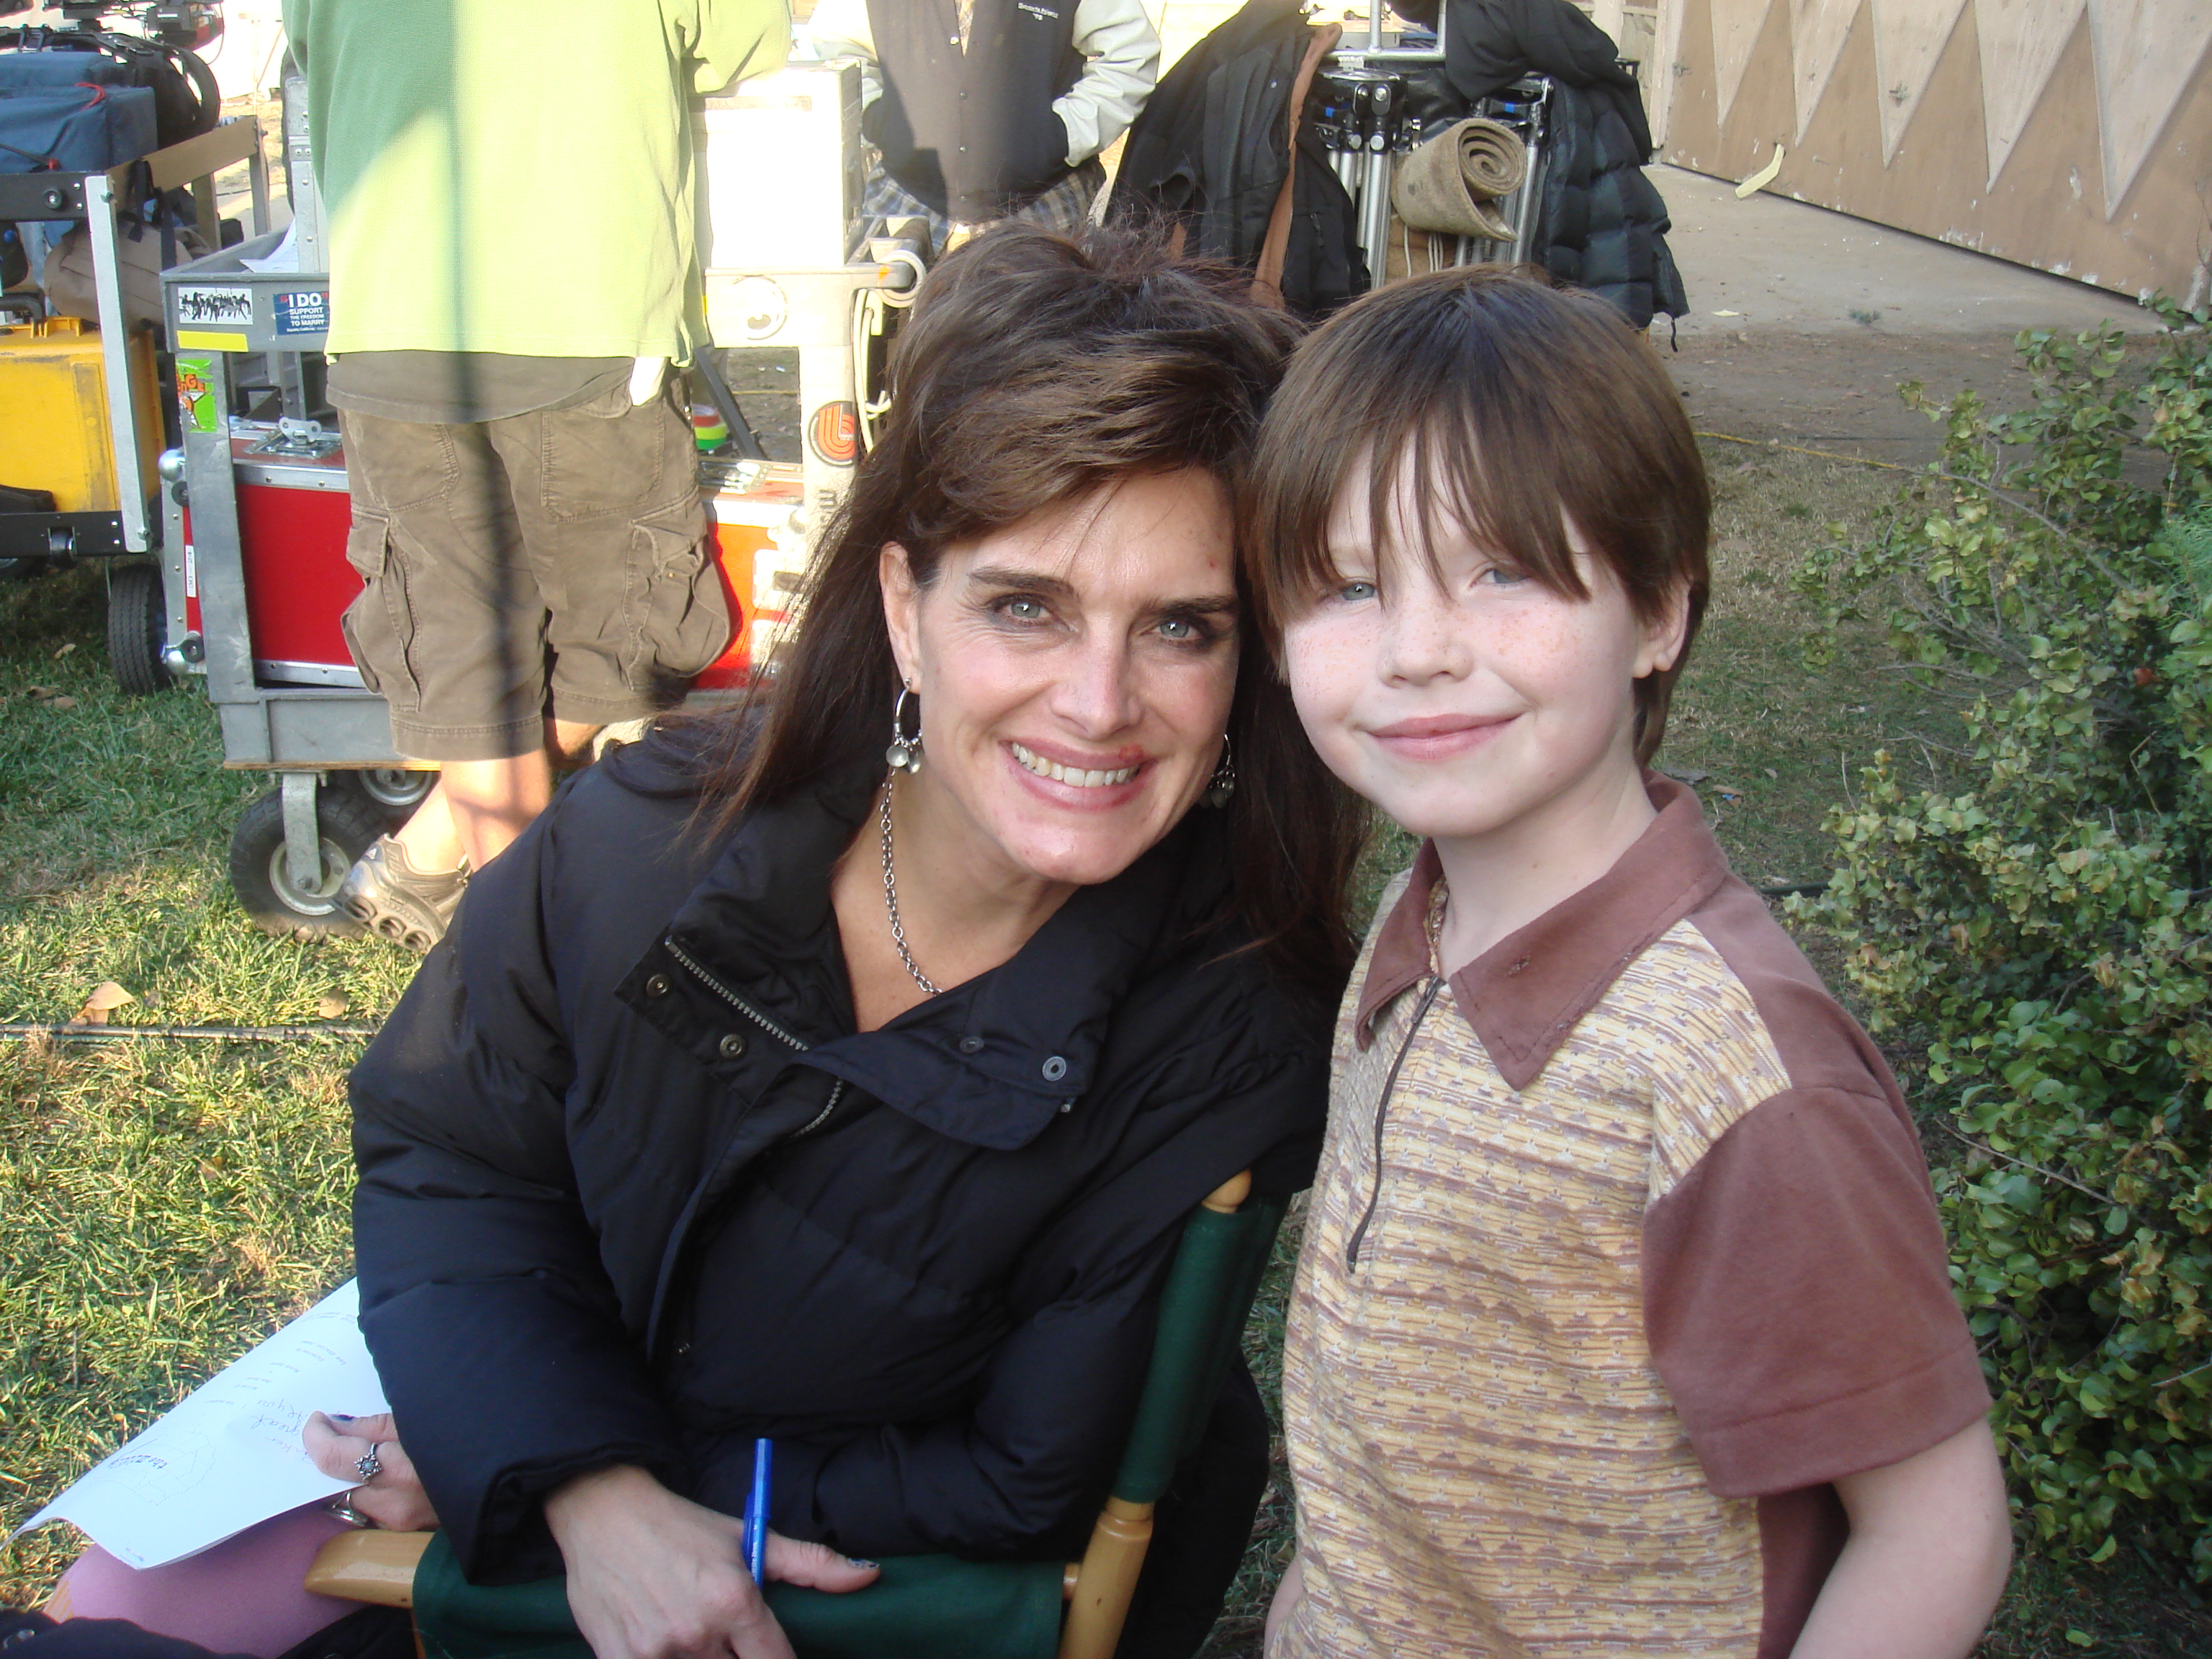 Parker Bolek with Brooke Shields on set for The Middle